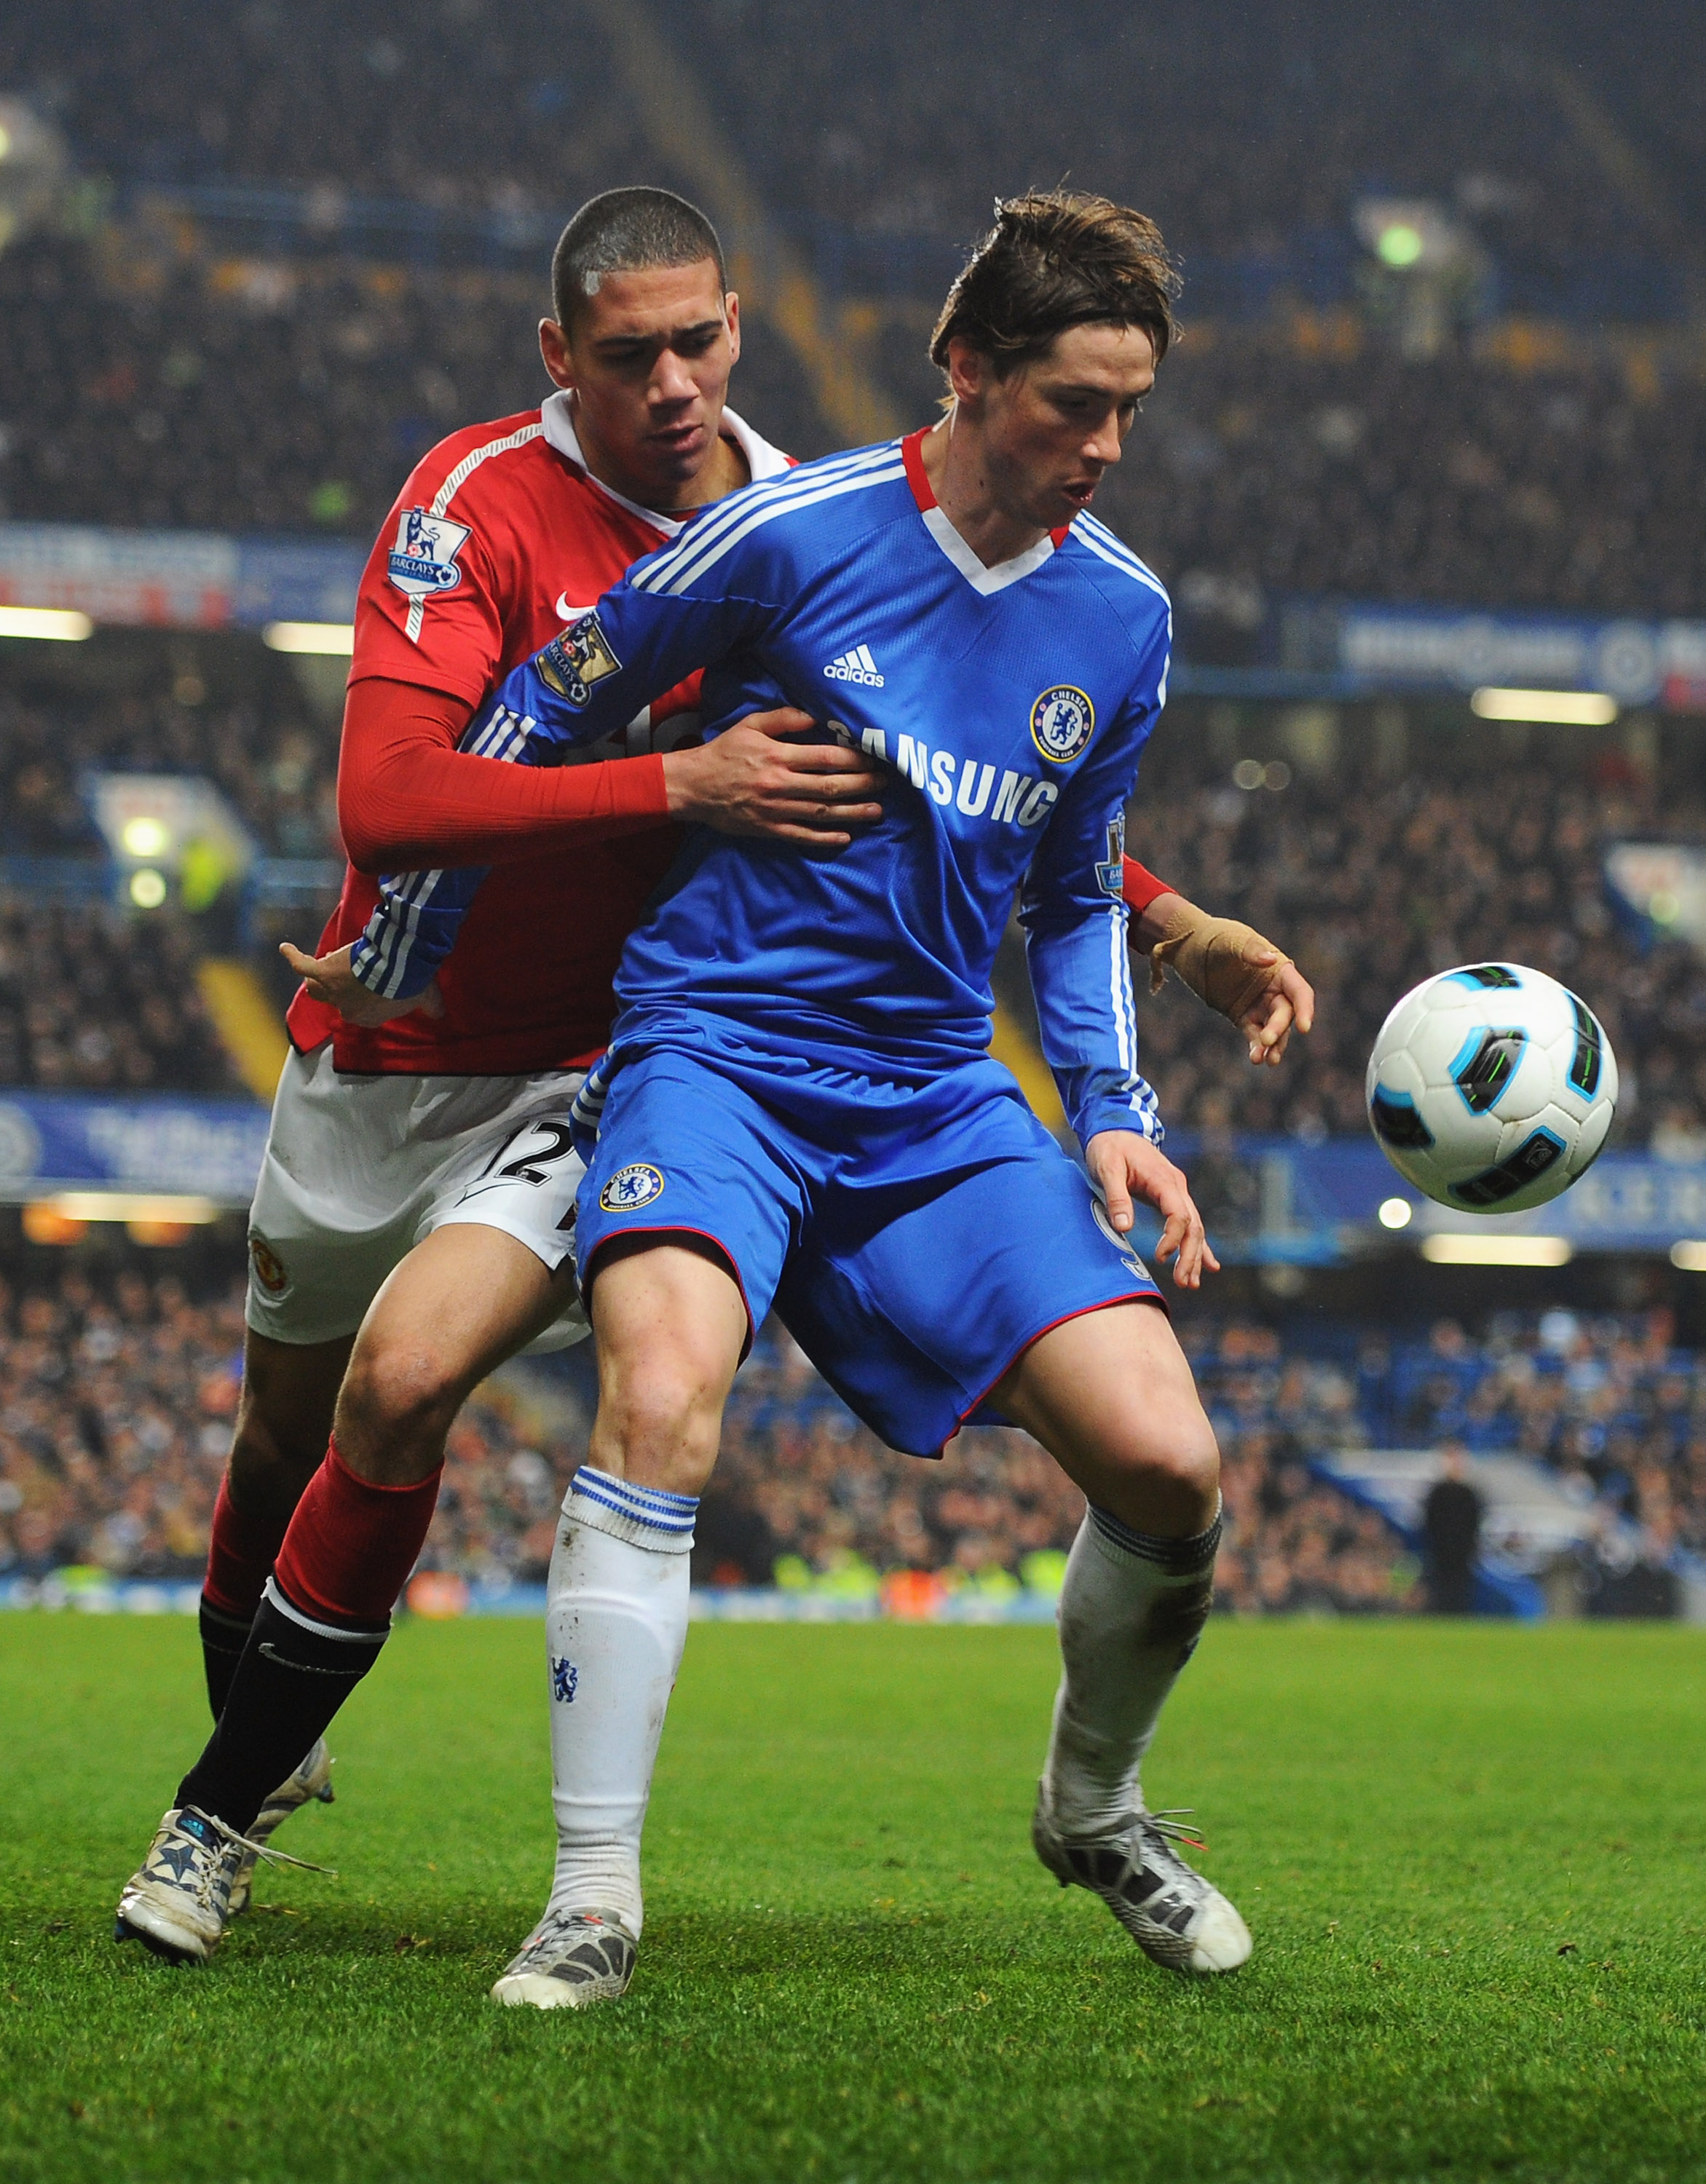 LONDON, ENGLAND - MARCH 01:  Fernando Torres of Chelsea is closed down by Chris Smalling of Manchester United during the Barclays Premier League match between Chelsea and Manchester United at Stamford Bridge on March 1, 2011 in London, England.  (Photo by